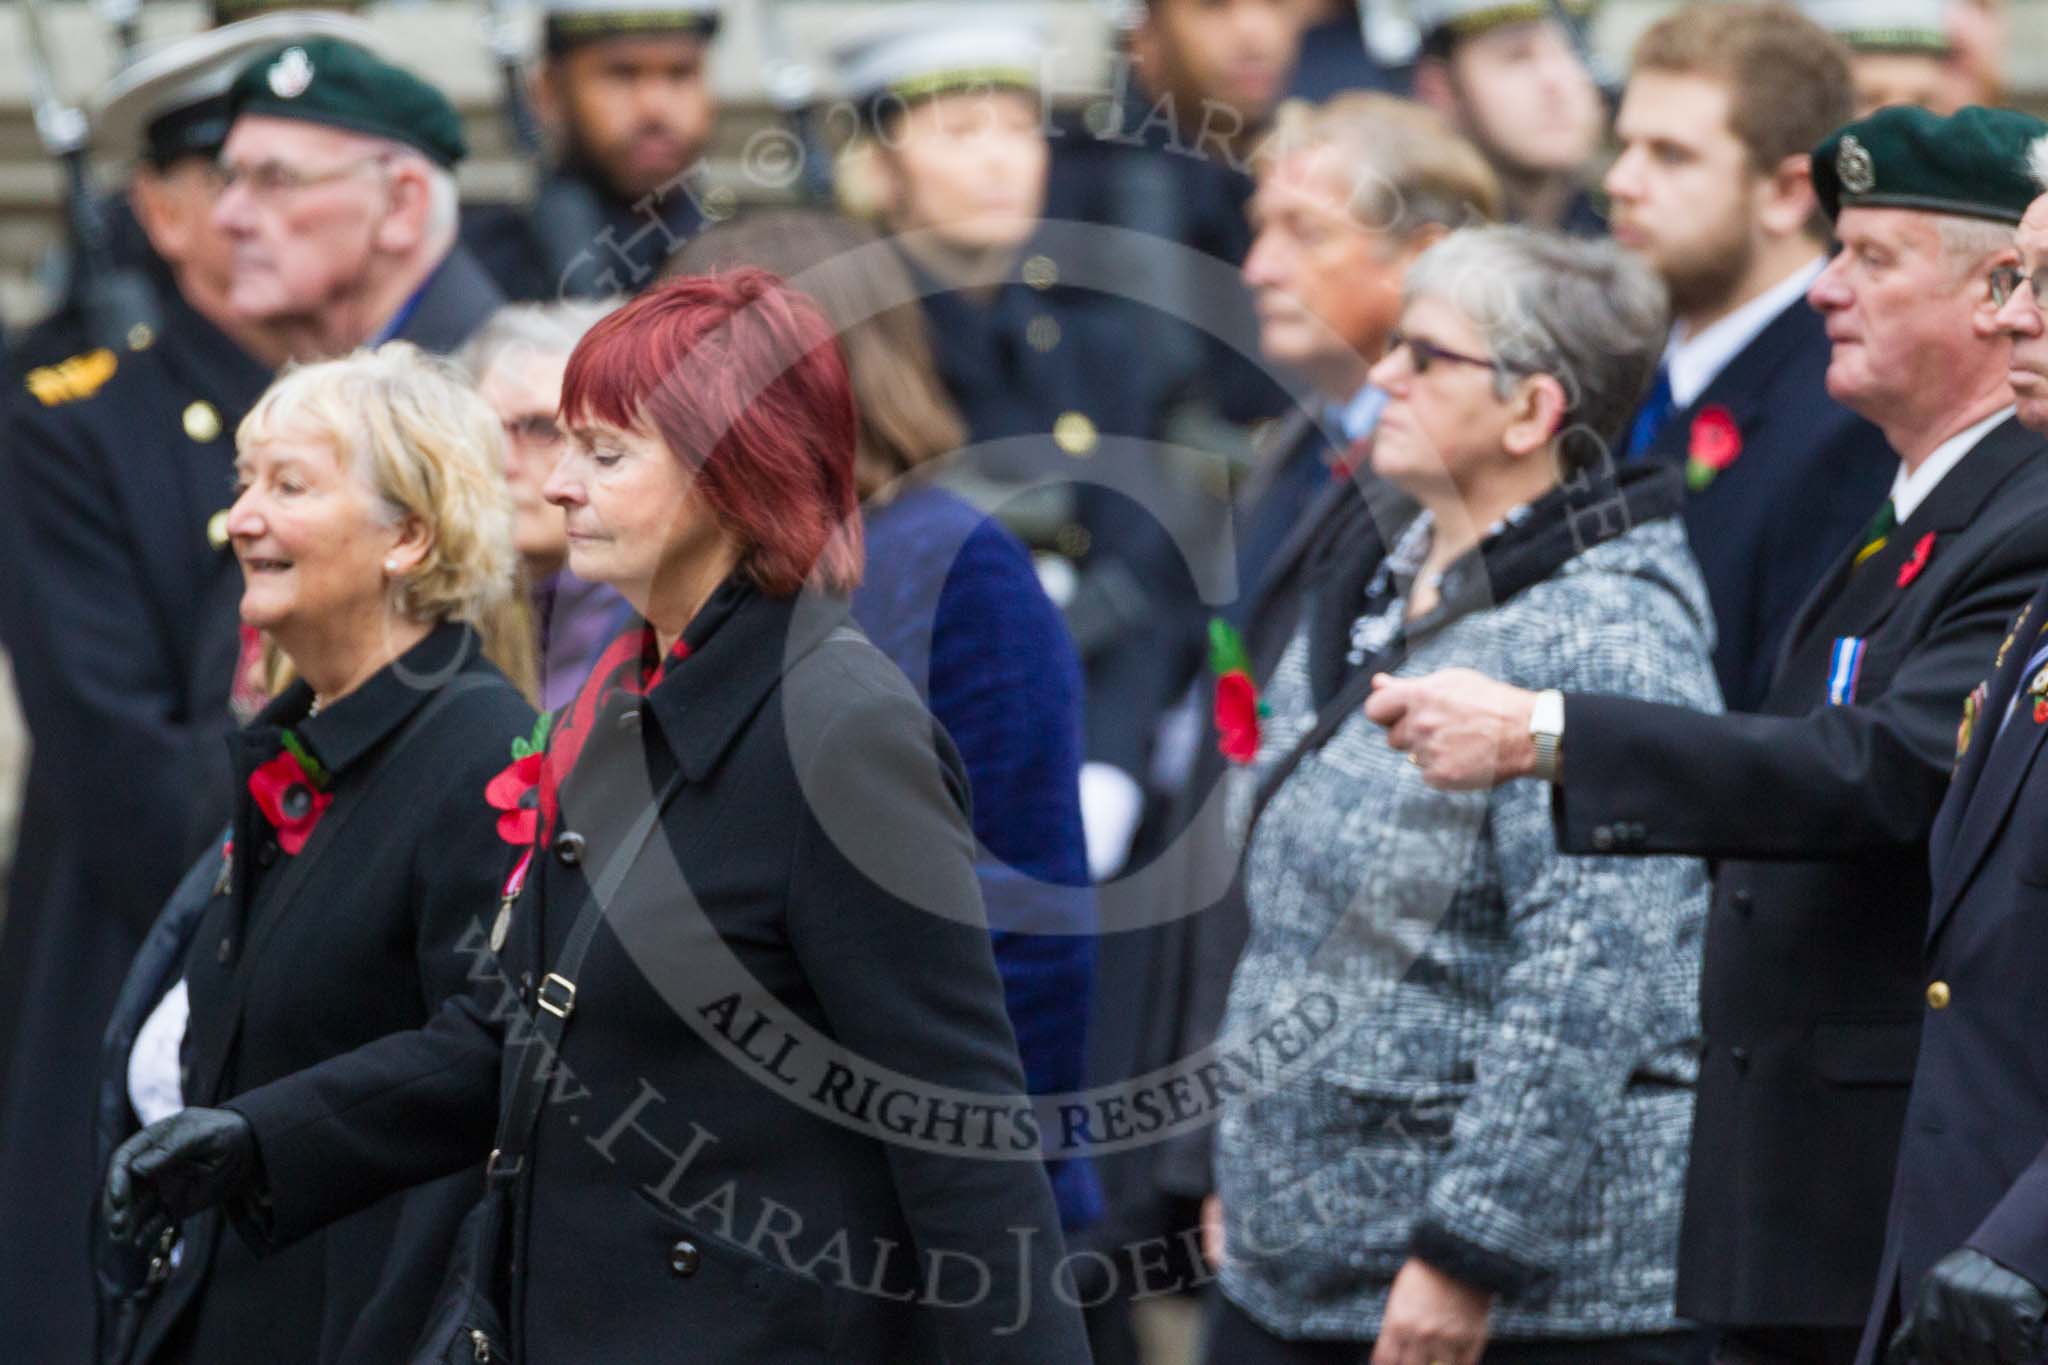 Remembrance Sunday at the Cenotaph 2015: Group M34, TRBL Non Ex-Service Members.
Cenotaph, Whitehall, London SW1,
London,
Greater London,
United Kingdom,
on 08 November 2015 at 12:18, image #1635